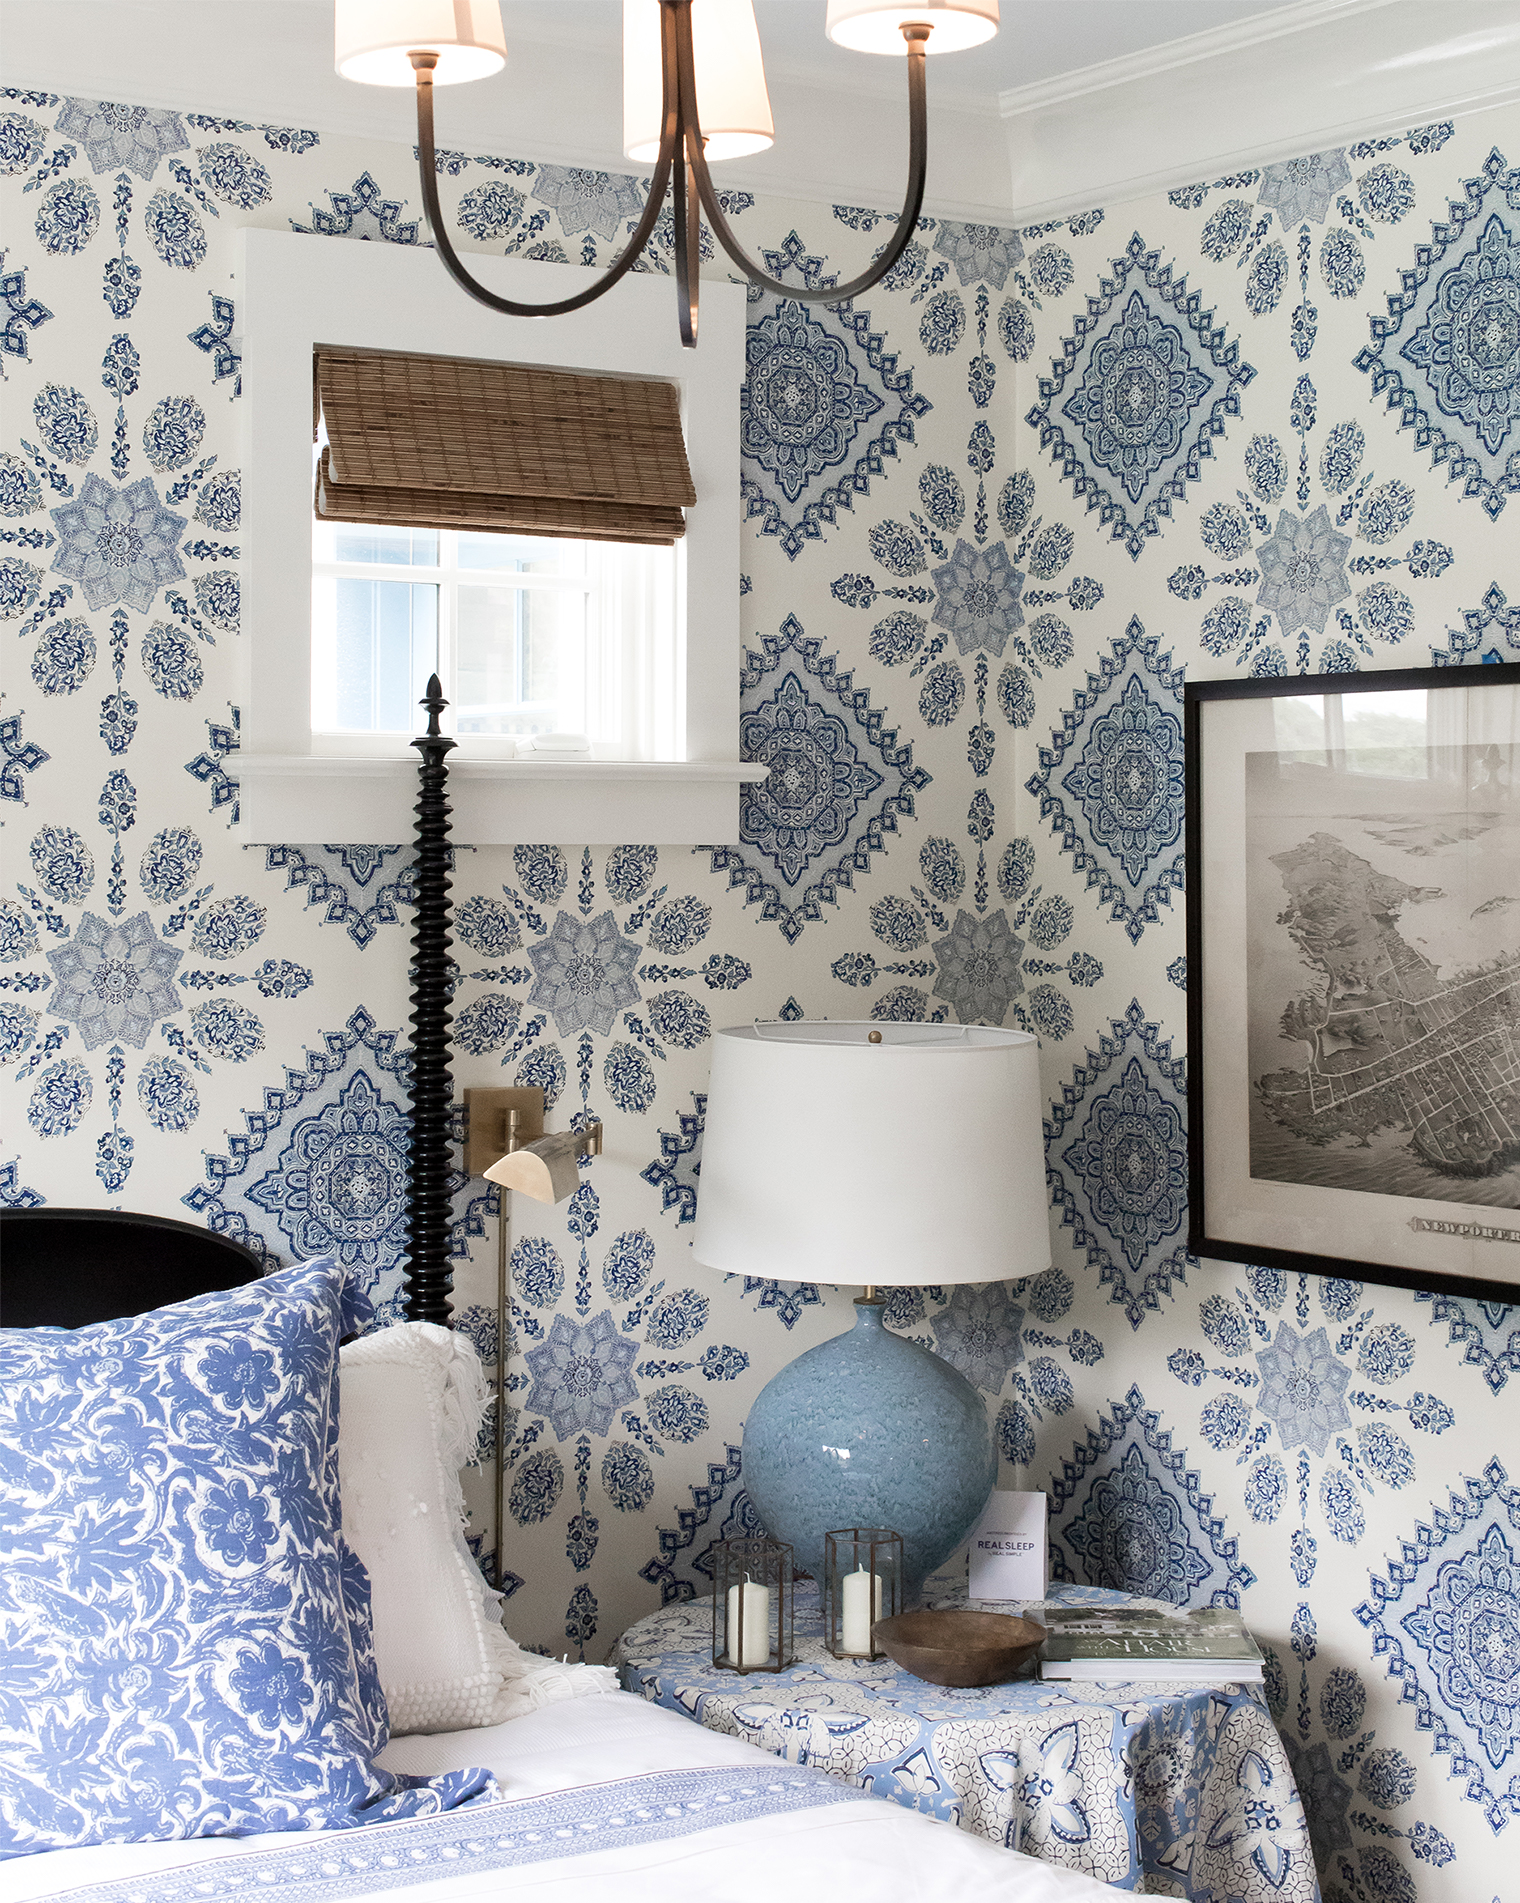 15 Inspirational Ideas For Decorating With Blue And White - Blue And White Home Decor Ideas